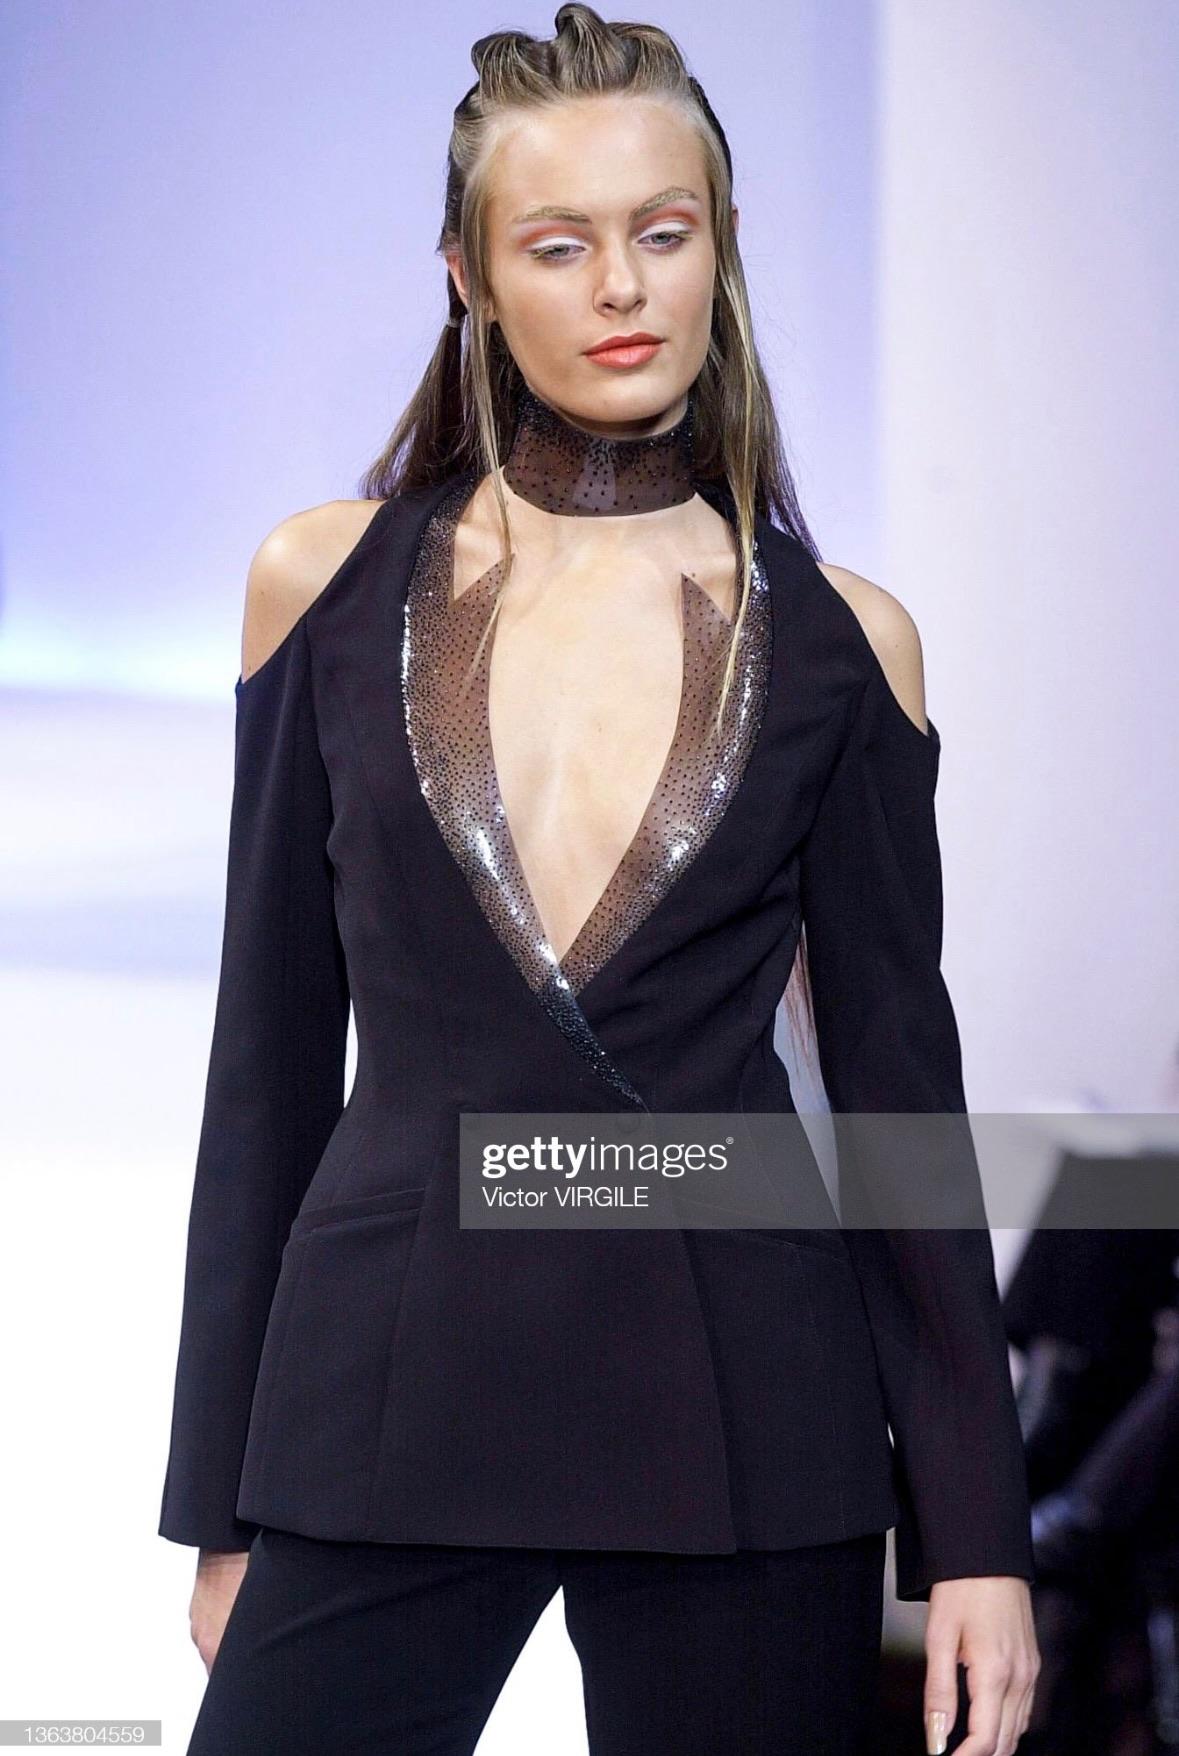 Presenting a gorgeous black Thierry Mugler blazer, designed by Manfred Mugler. From the Spring/Summer 2001 collection, this jacket debuted on the season's runway. Defined by its pointed angular PVC beaded accents at the neckline, this jacket